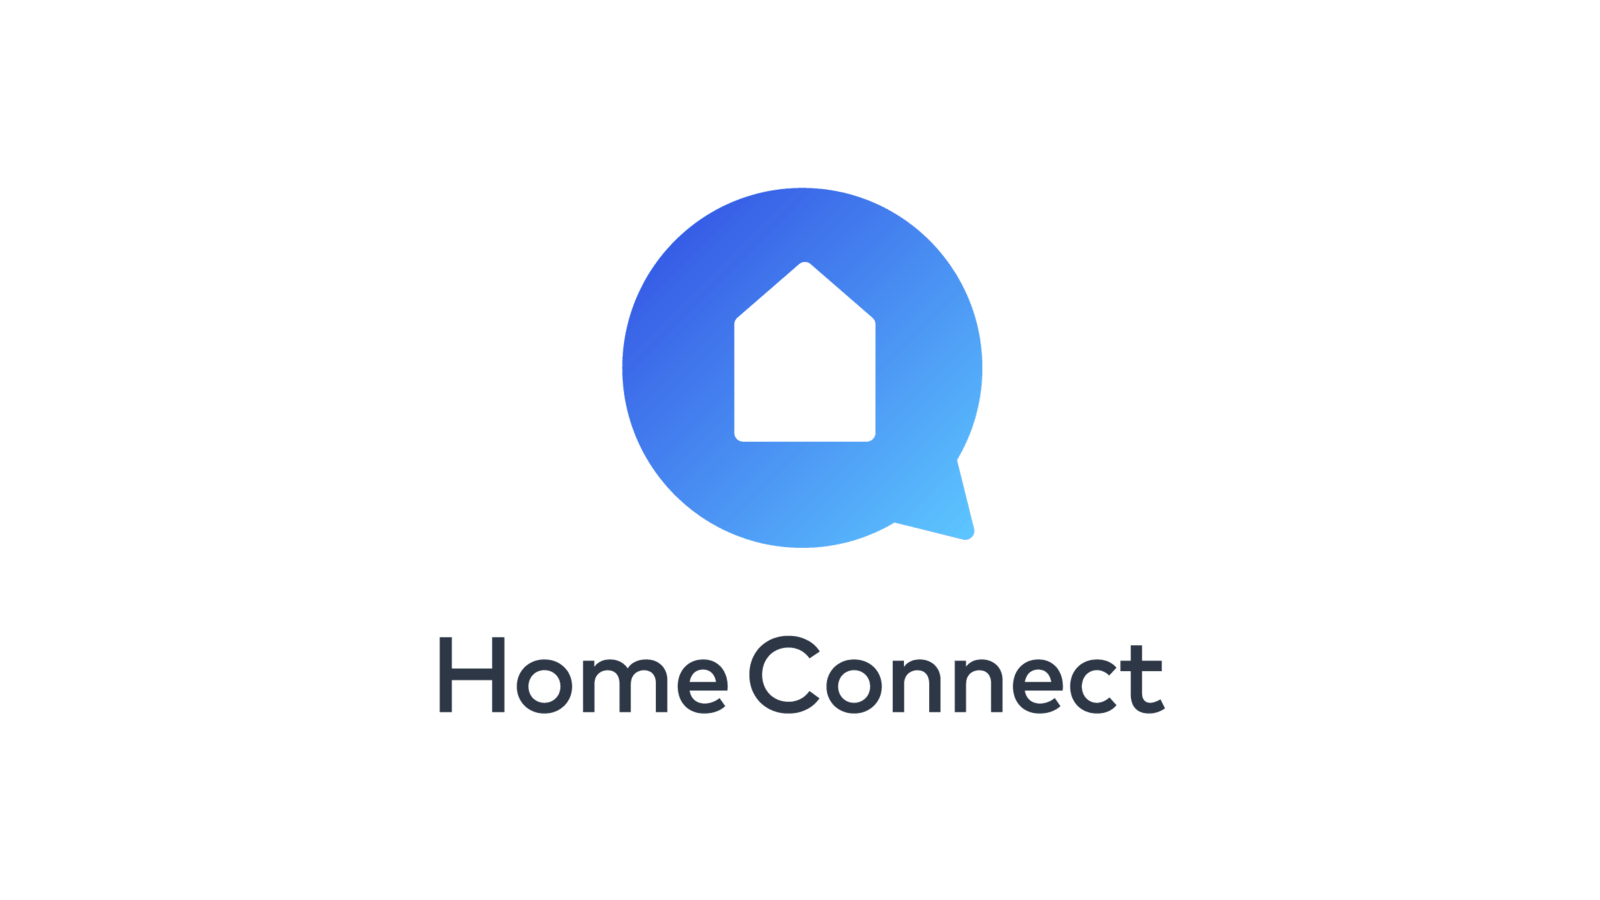 Home connections